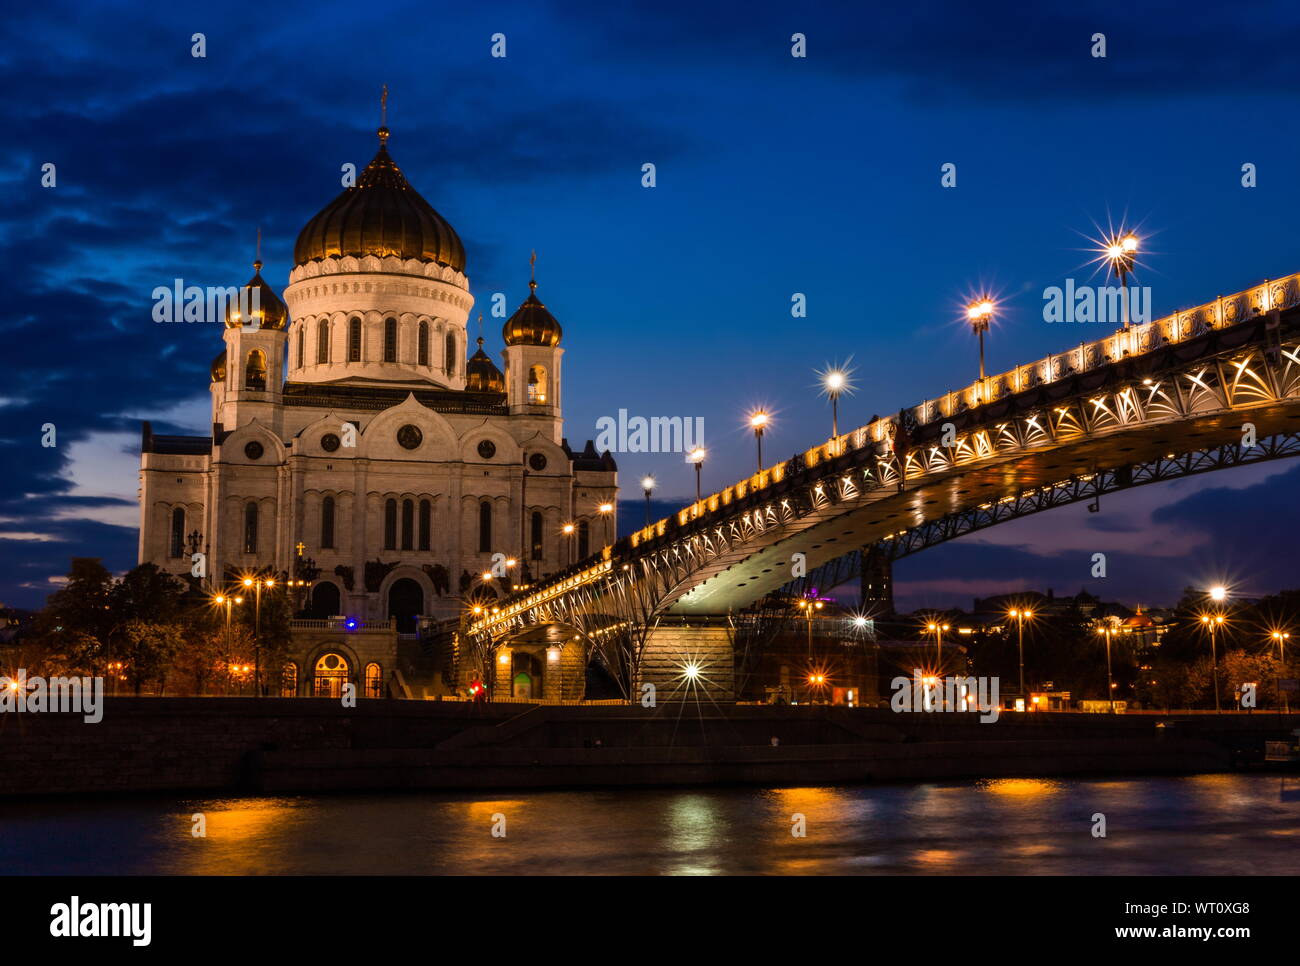 Illuminated Cathedral of Christ the Savior framed with old style street lights of Patriarchy Bridge at night. Stock Photo